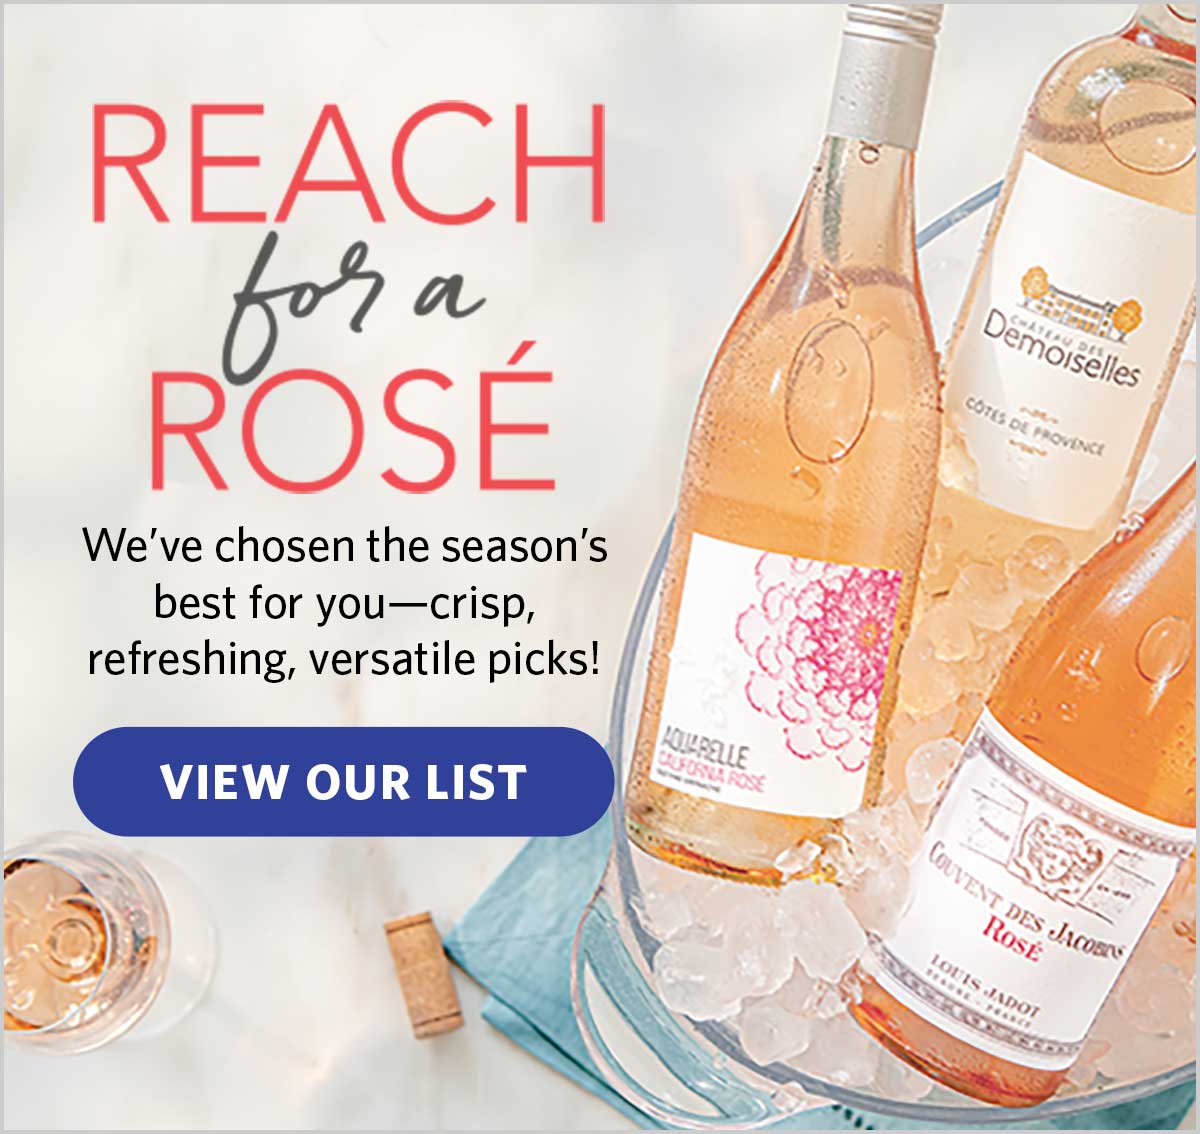 View our list of rose wines